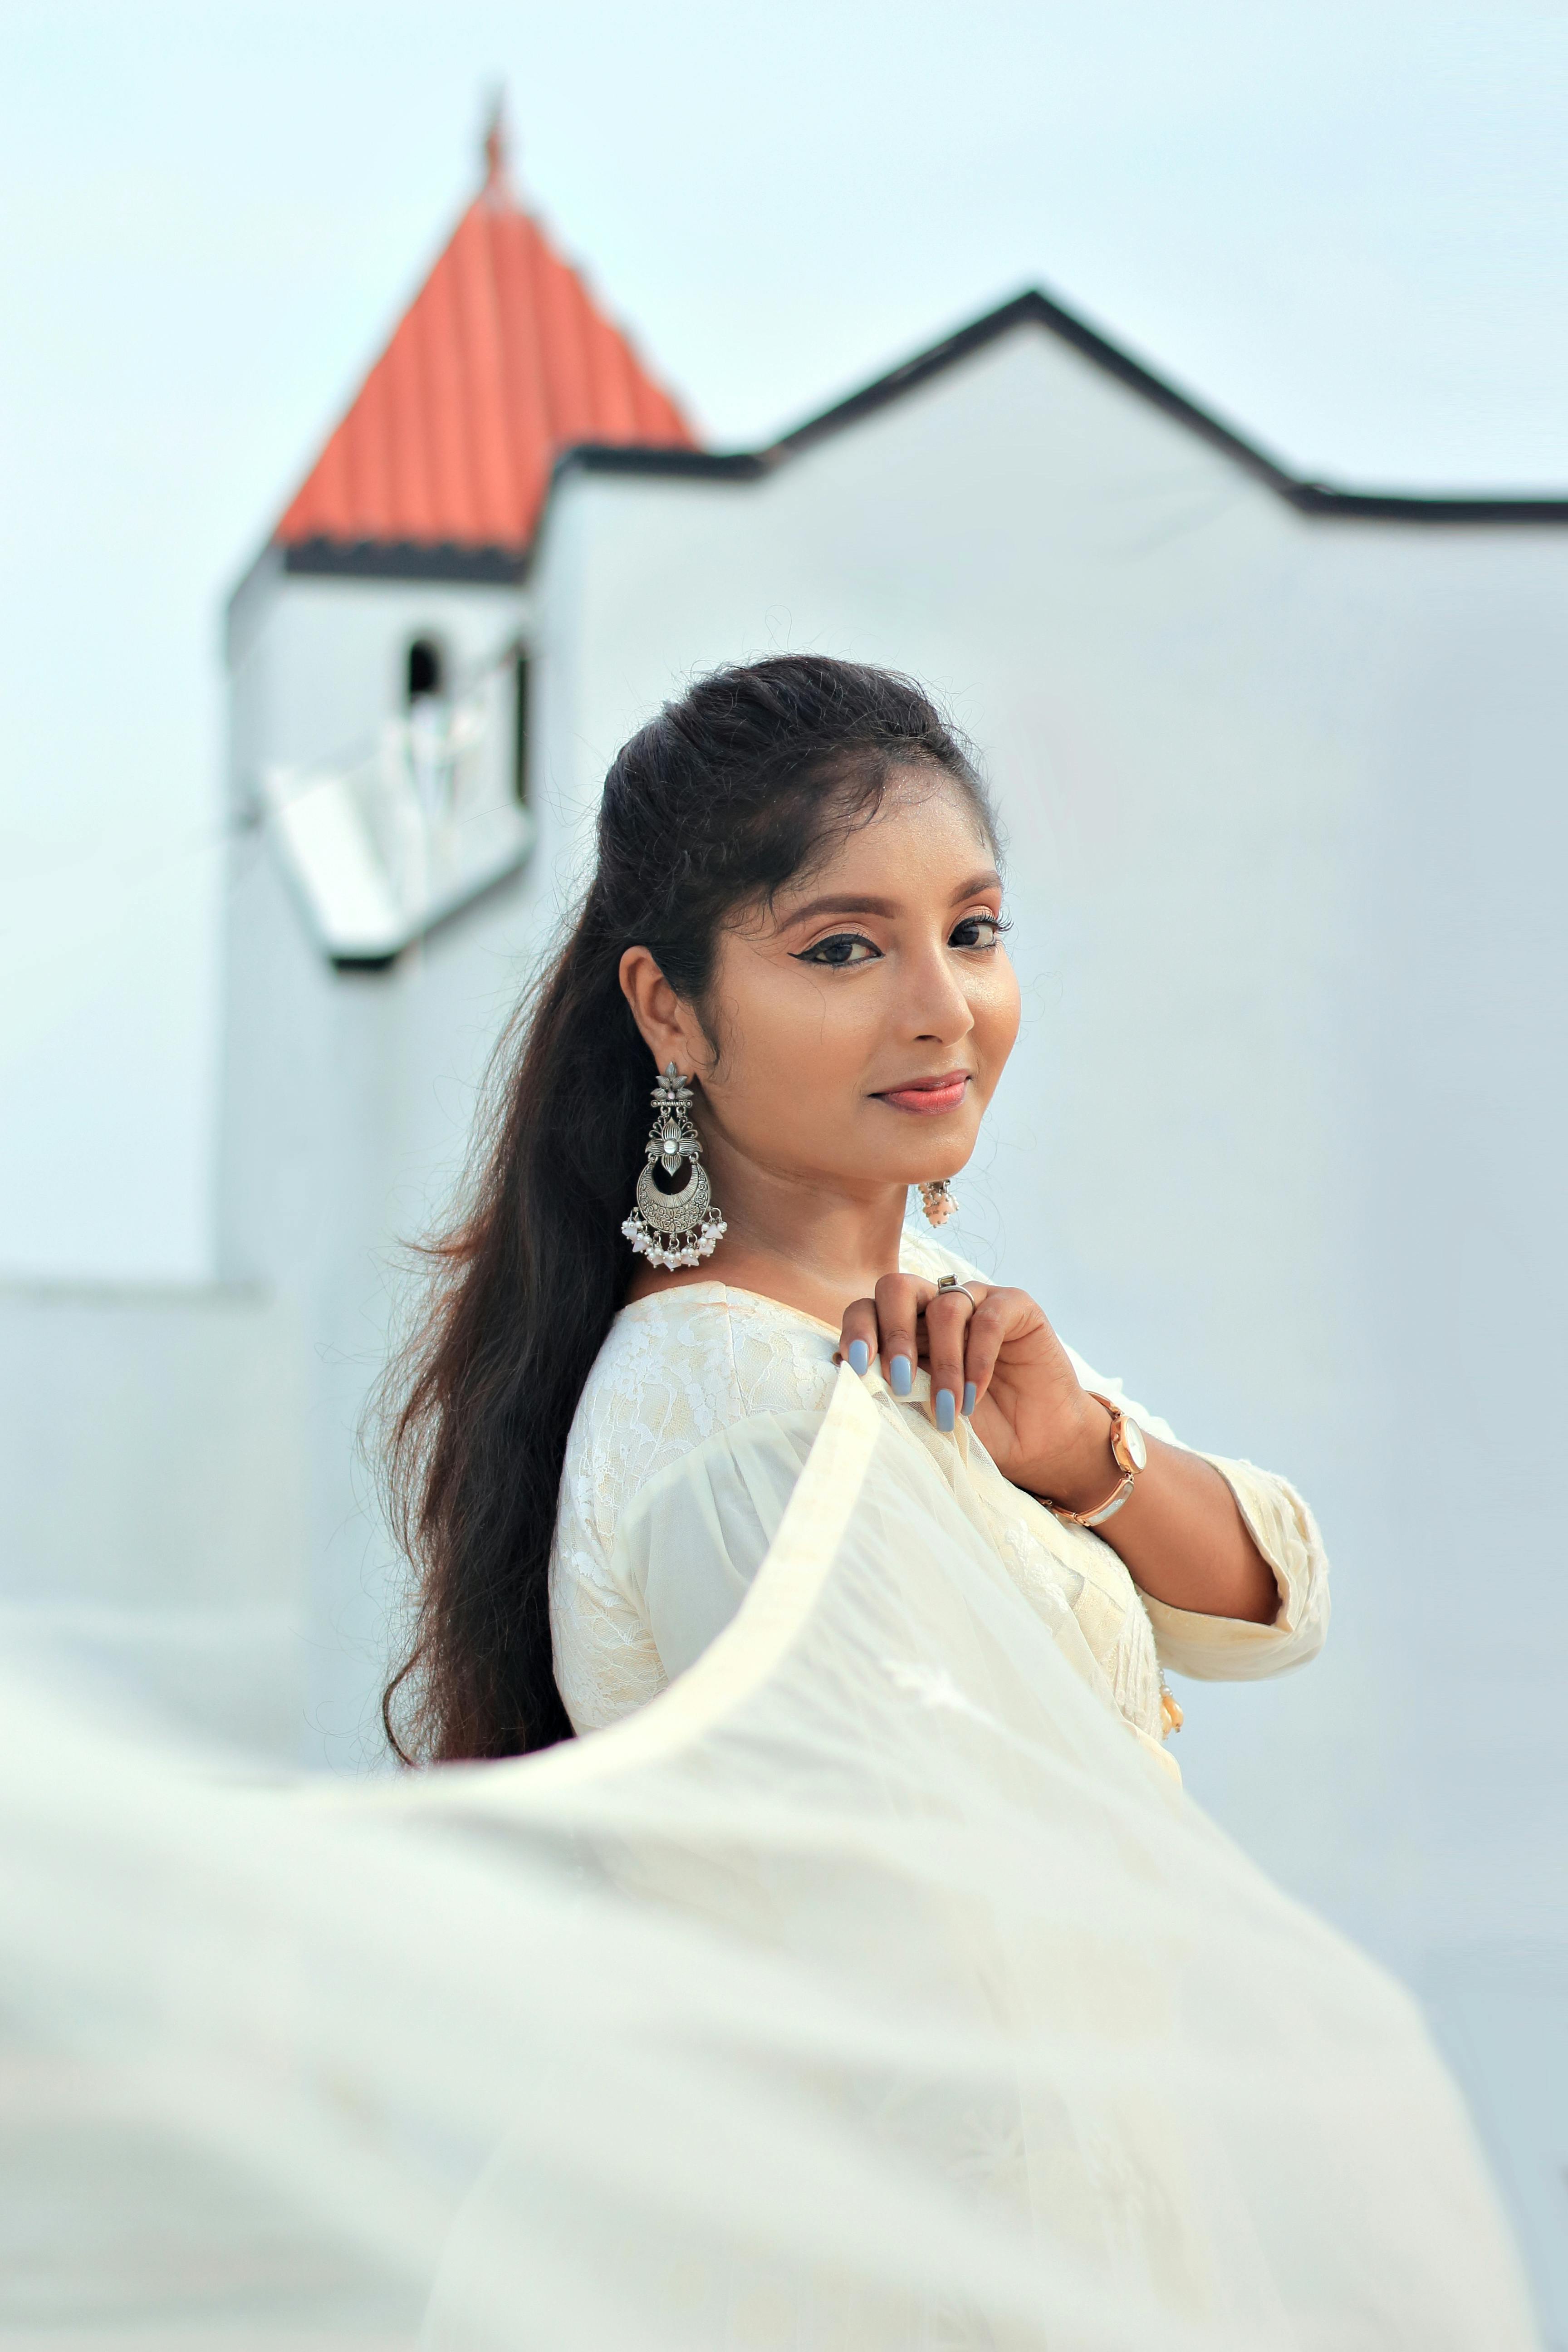 free photo of indian bride in front of a church